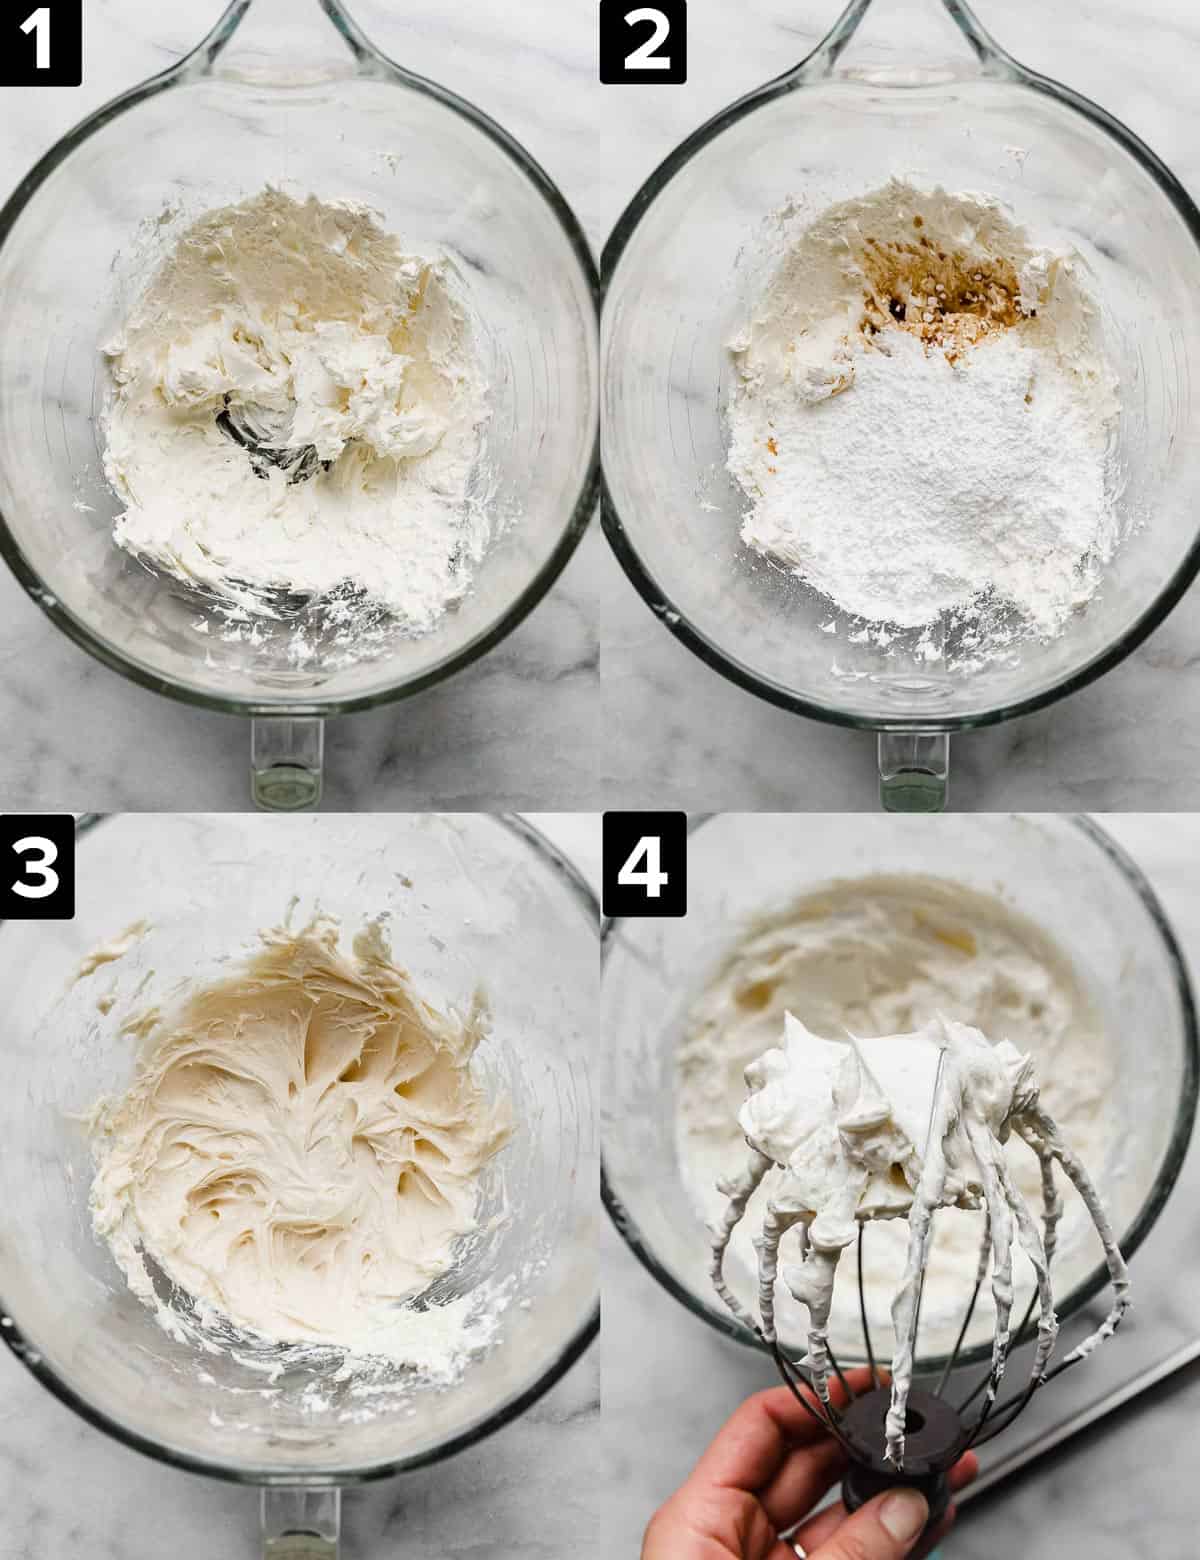 Four images showing how to make Cream Cheese Whipped Cream Frosting in a glass mixing bowl on a white background. Top left: whipped cream cheese, top right has powdered sugar and vanilla added to whipped cream cheese. Bottom left is whipped cream cheese and powdered sugar. Bottom right is a whisk with Cream Cheese Whipped Cream Frosting on it.